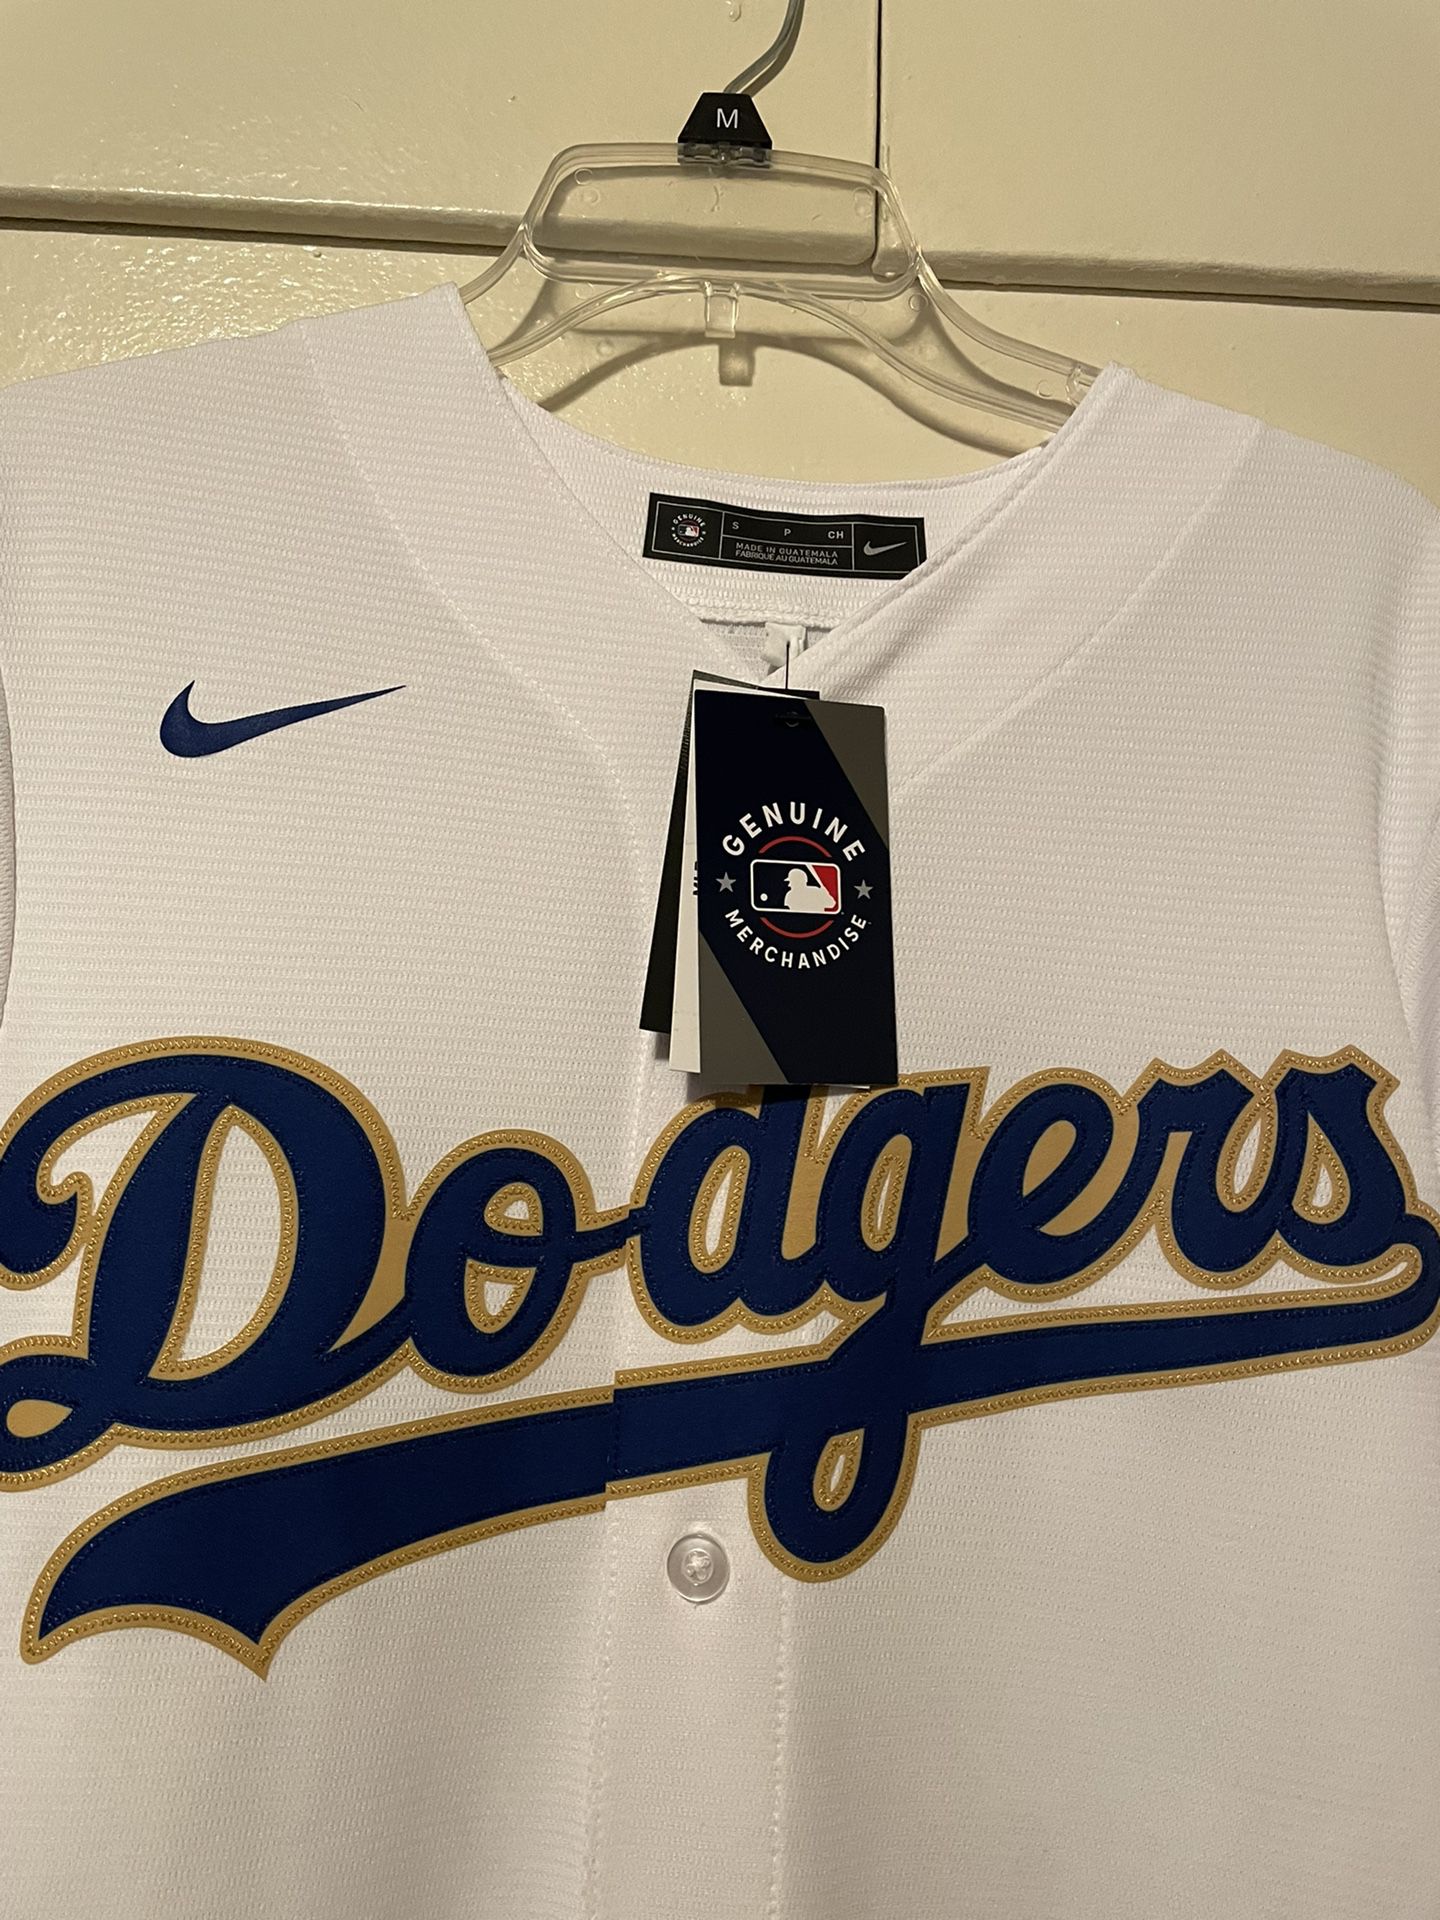 Dodgers World Series Jersey for Sale in Irwindale, CA - OfferUp